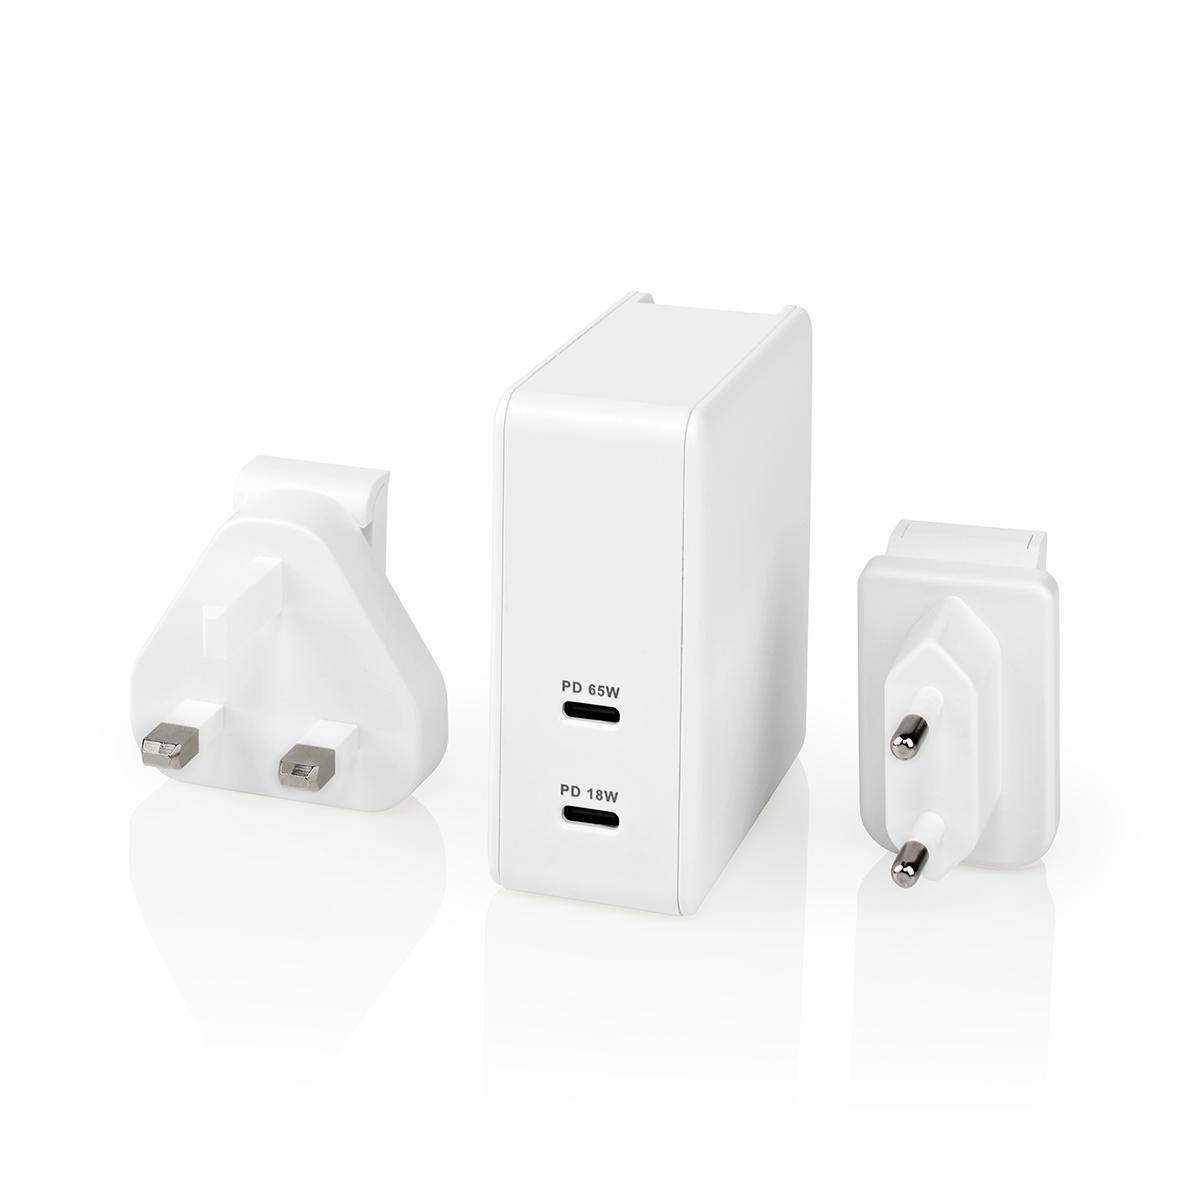 Nedis Quick Wall Charger – 65W – 2 x USB-C Output